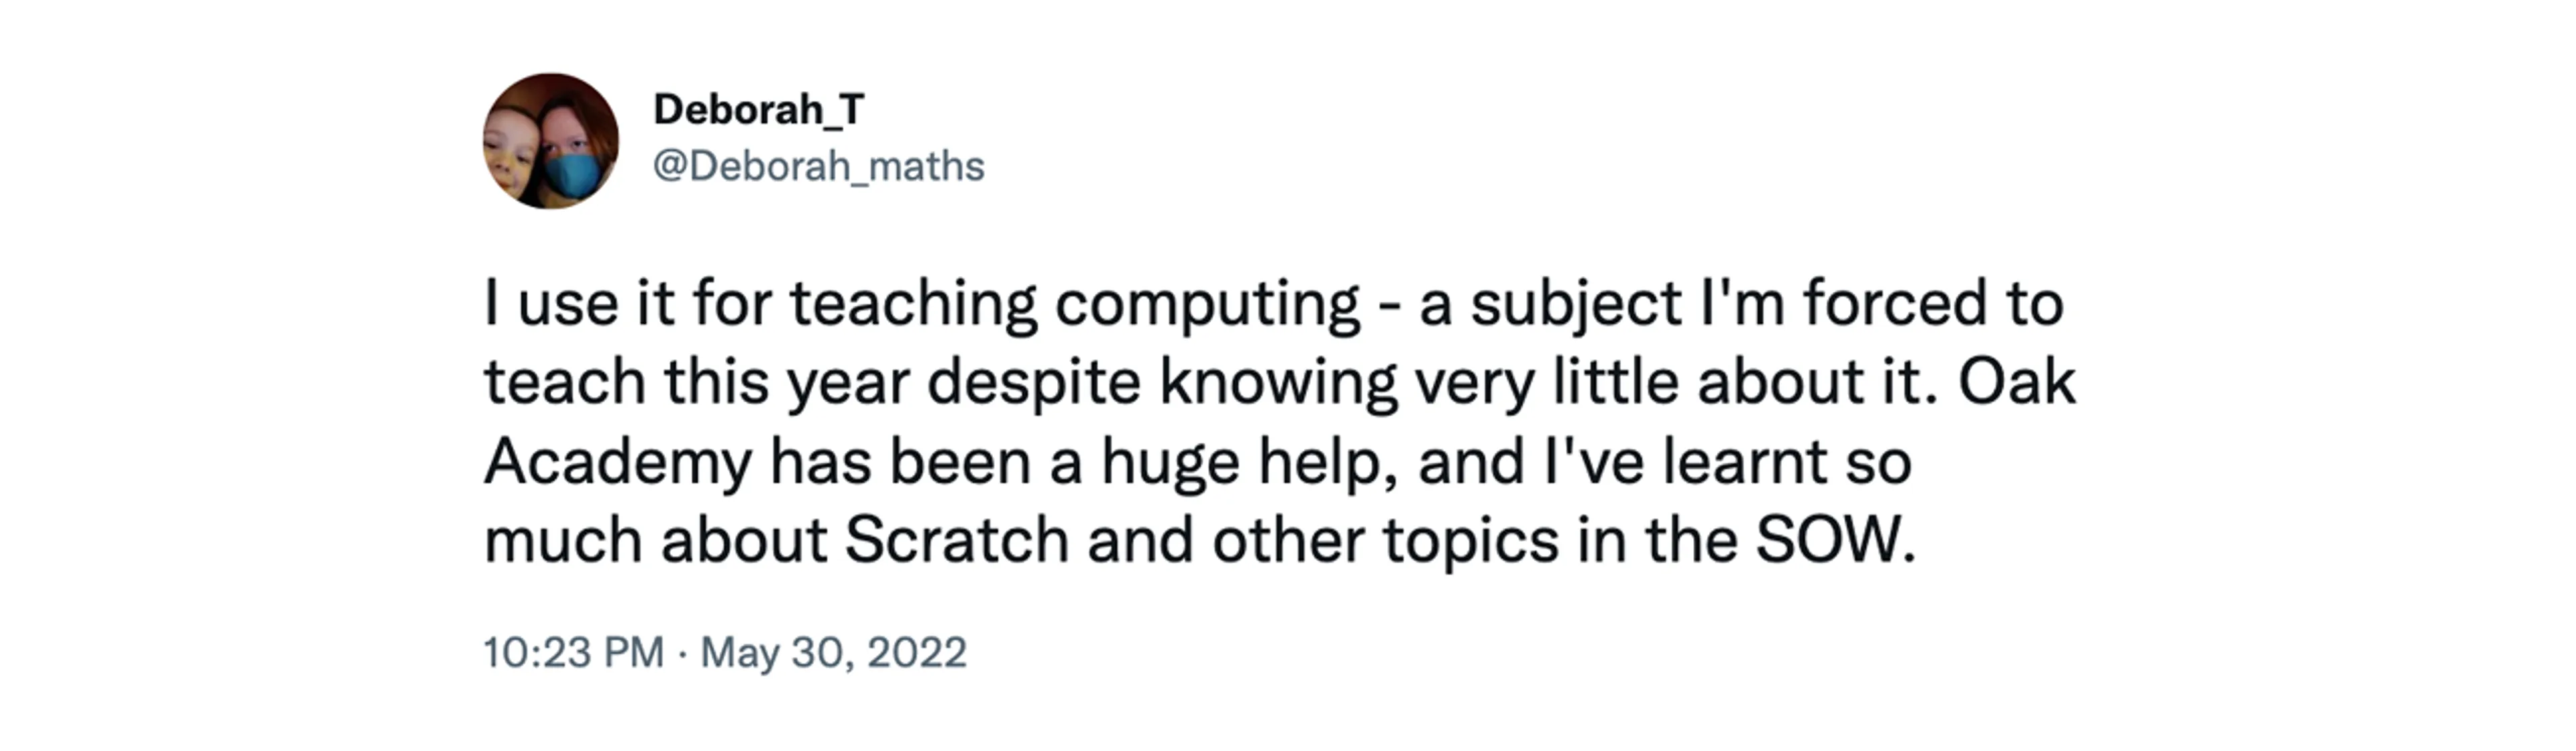 Screenshot of tweet from @Deborah_maths, at 10:23pm May 30 2022 saying "I use it for teaching computing - a subject I'm forced to teach this year despite knowing very little about it. Oak Academy has been a huge help, and I've learnt so much about Scratch and other topics in the SOW."